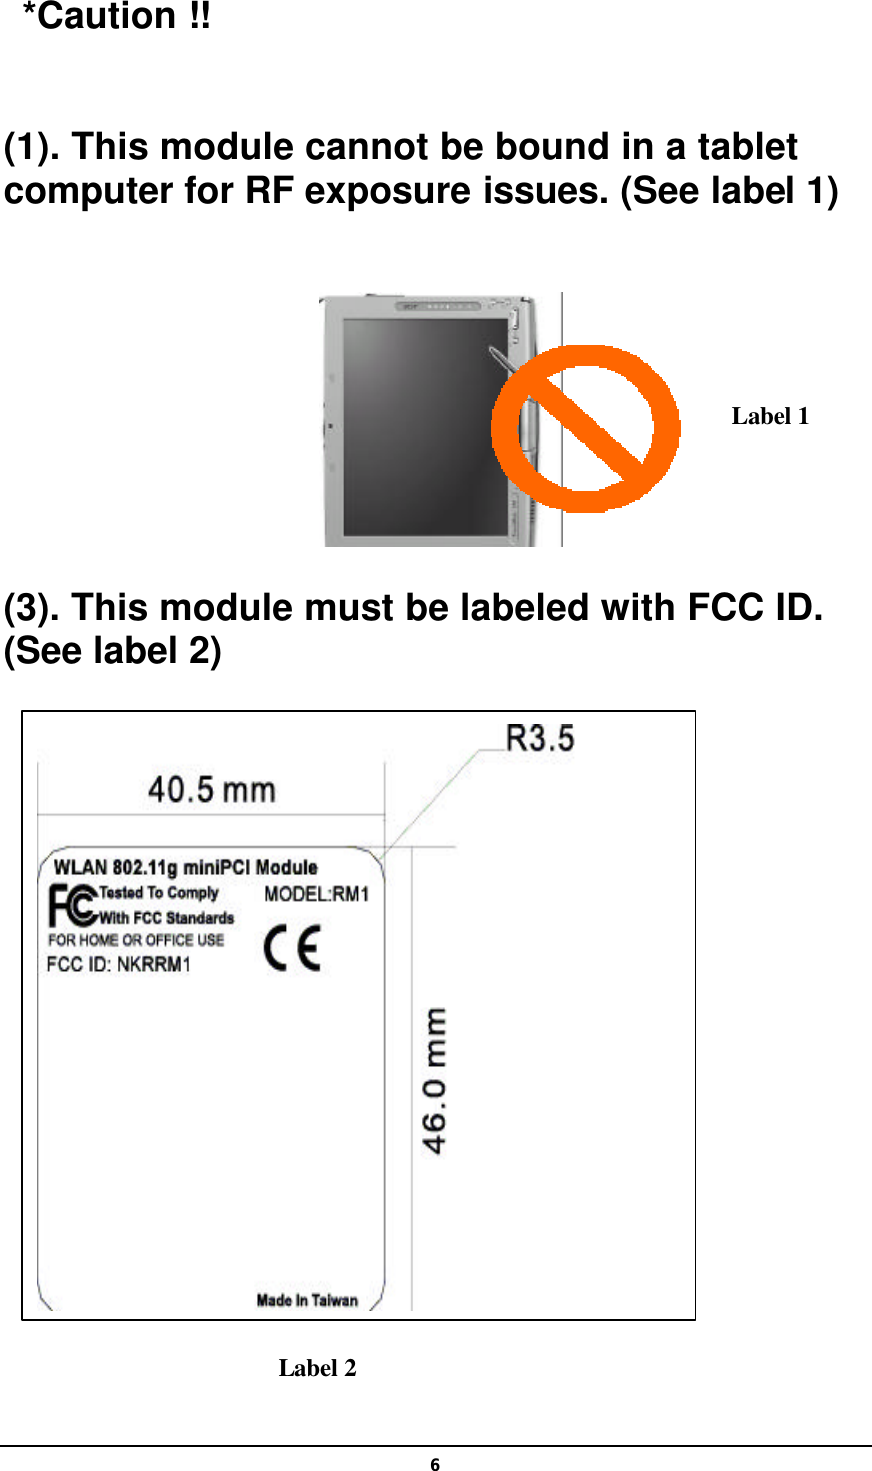  6 *Caution !!  (1). This module cannot be bound in a tablet computer for RF exposure issues. (See label 1)          (3). This module must be labeled with FCC ID. (See label 2)                                        Label 2  Label 1 